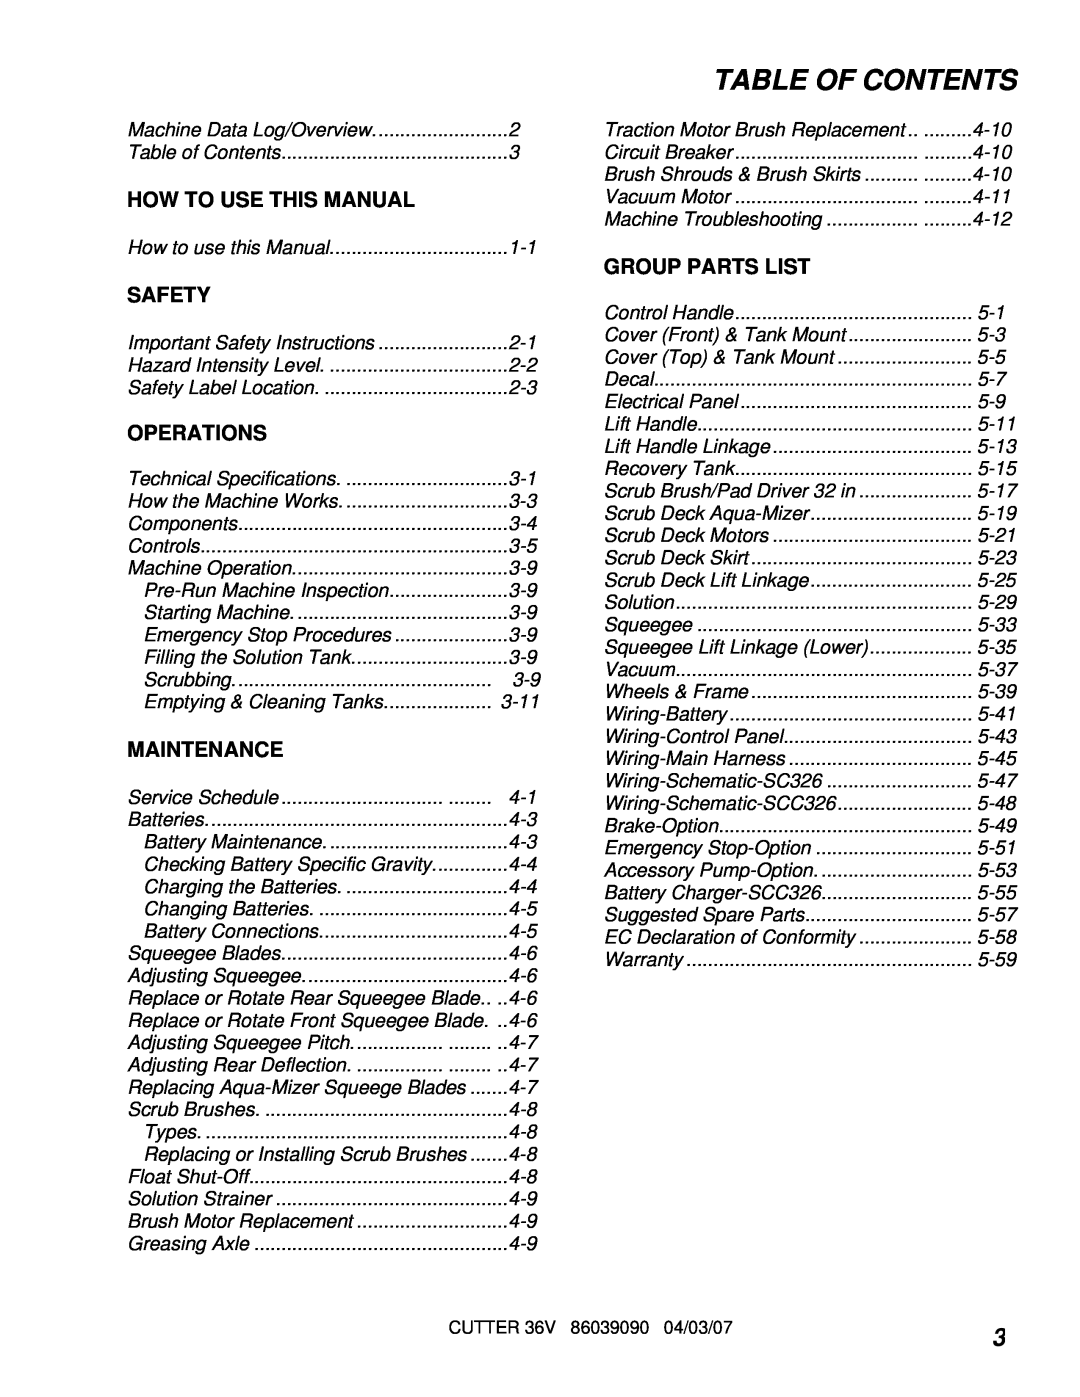 Windsor SCC326 10052260 manual Table Of Contents, How To Use This Manual, Safety, Operations, Maintenance, Group Parts List 